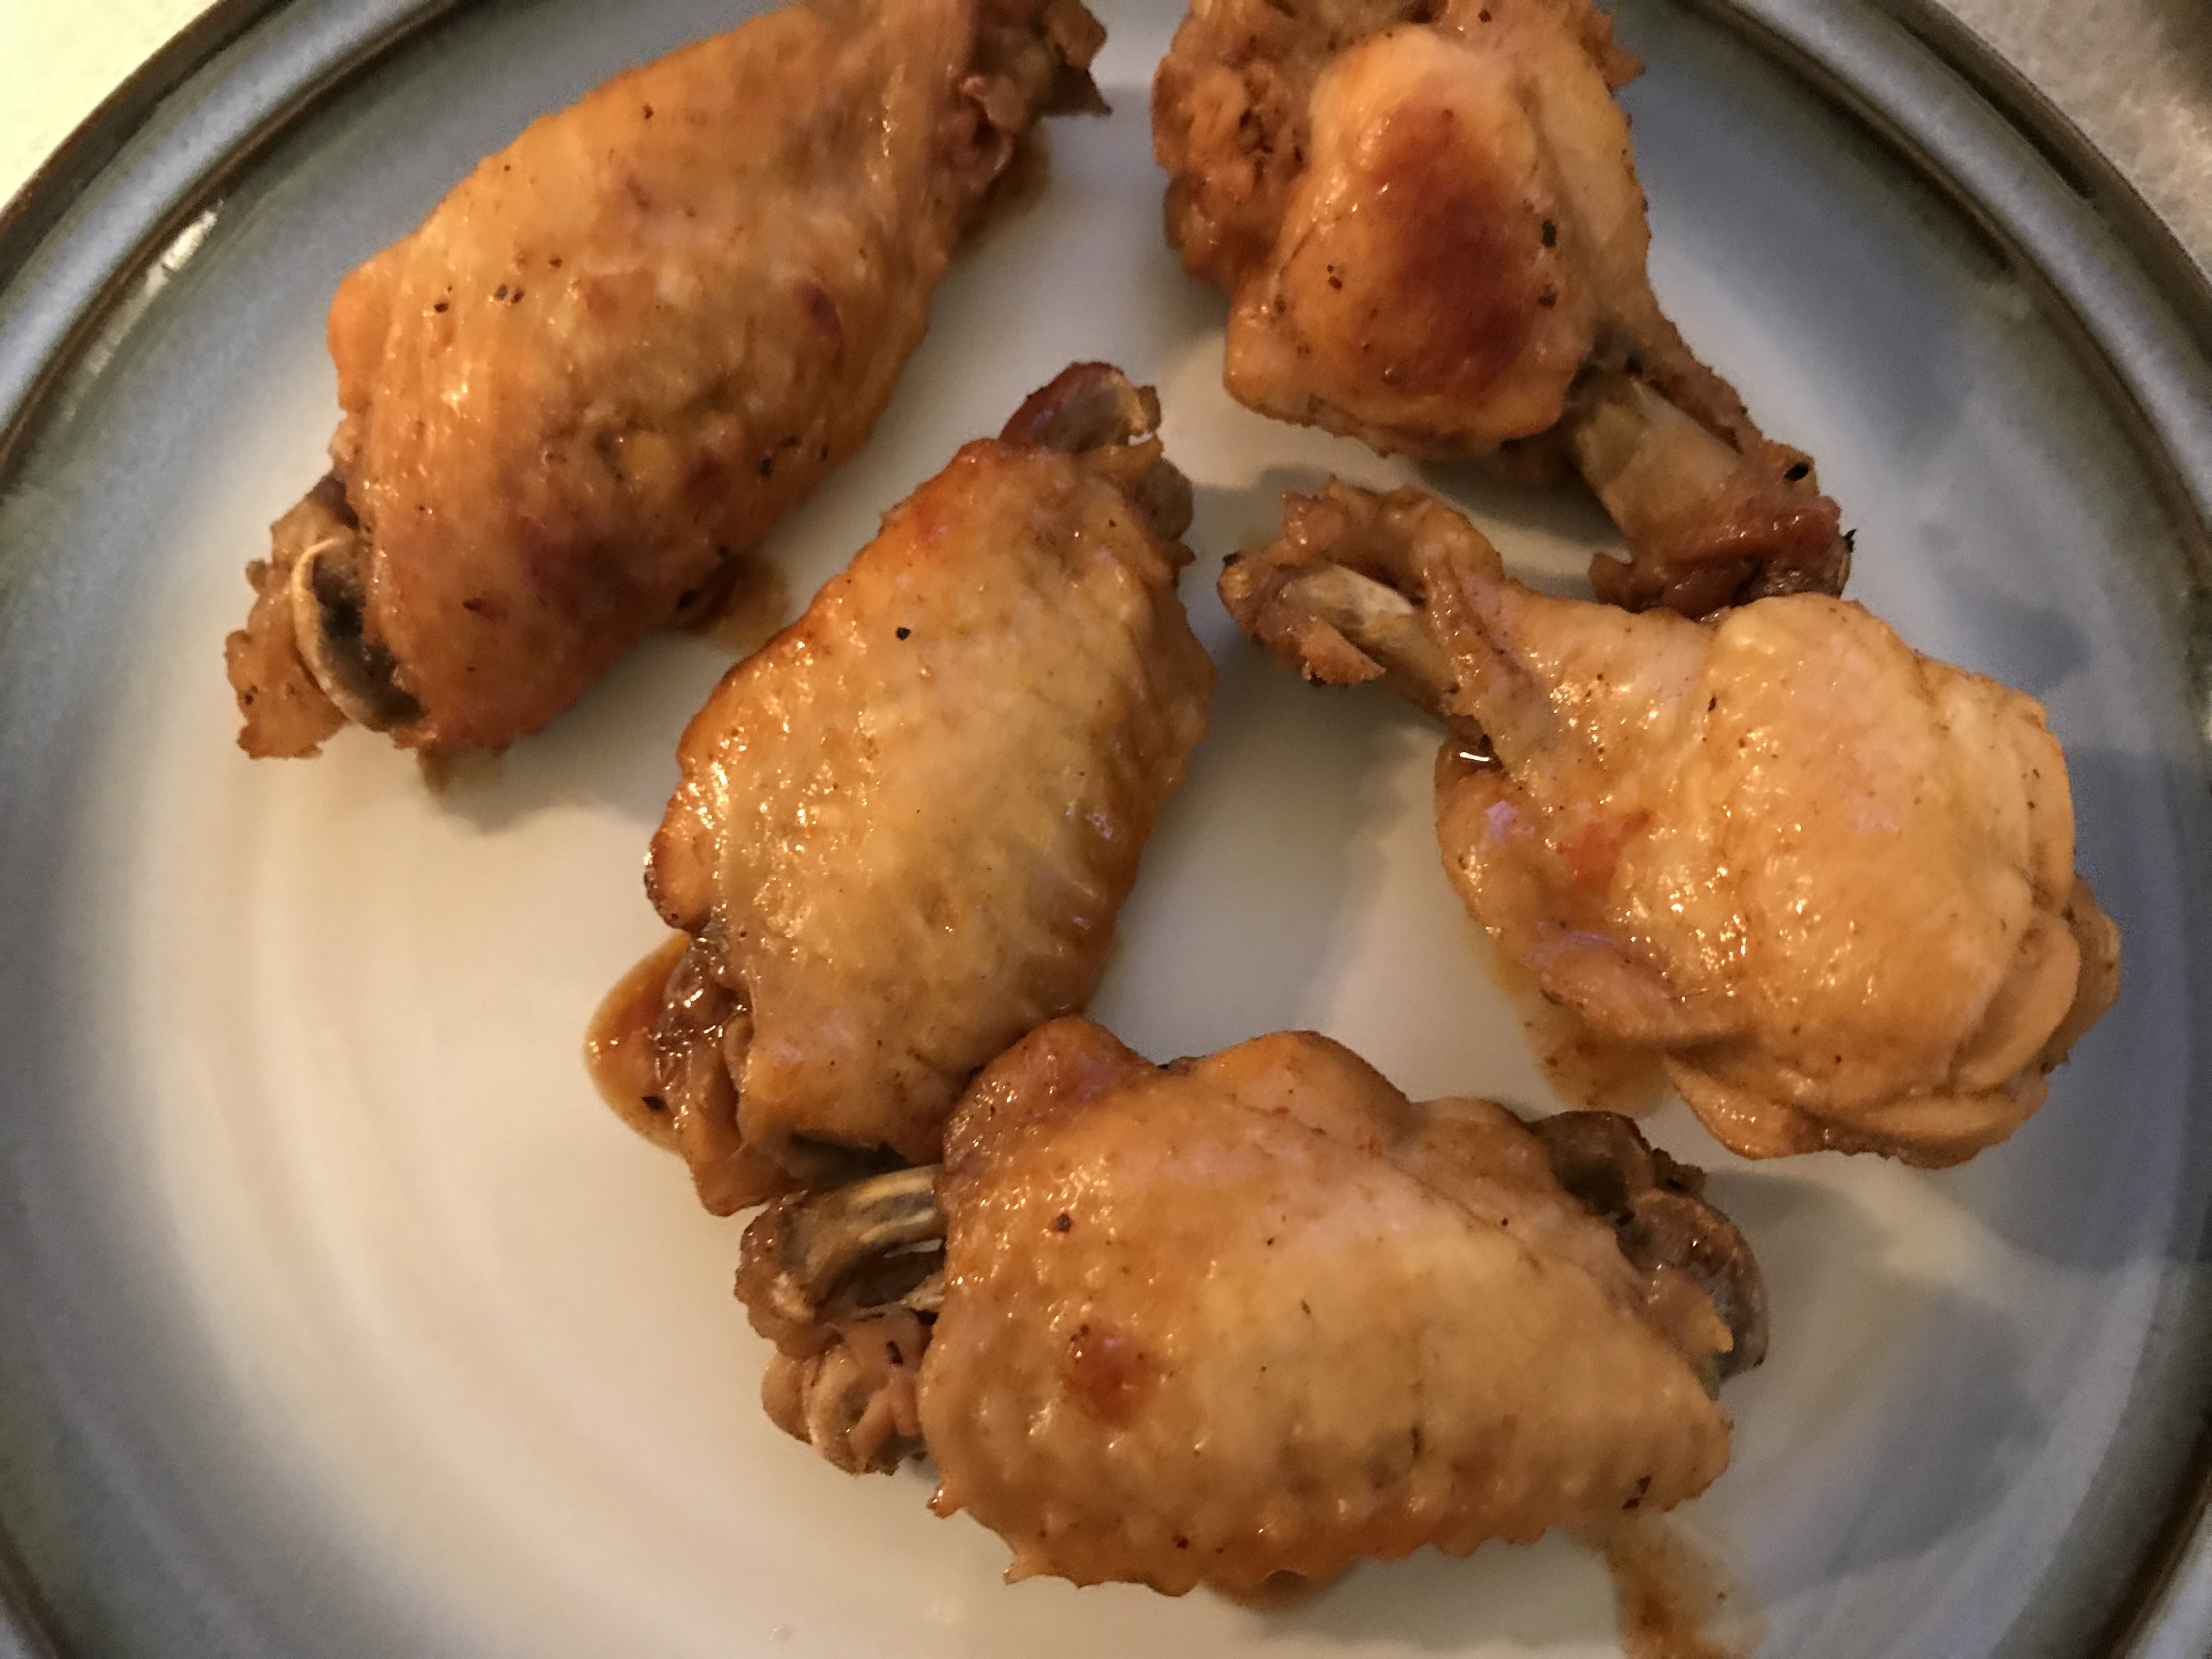 The Instant Pot Diaries: Let’s make some chicken wings